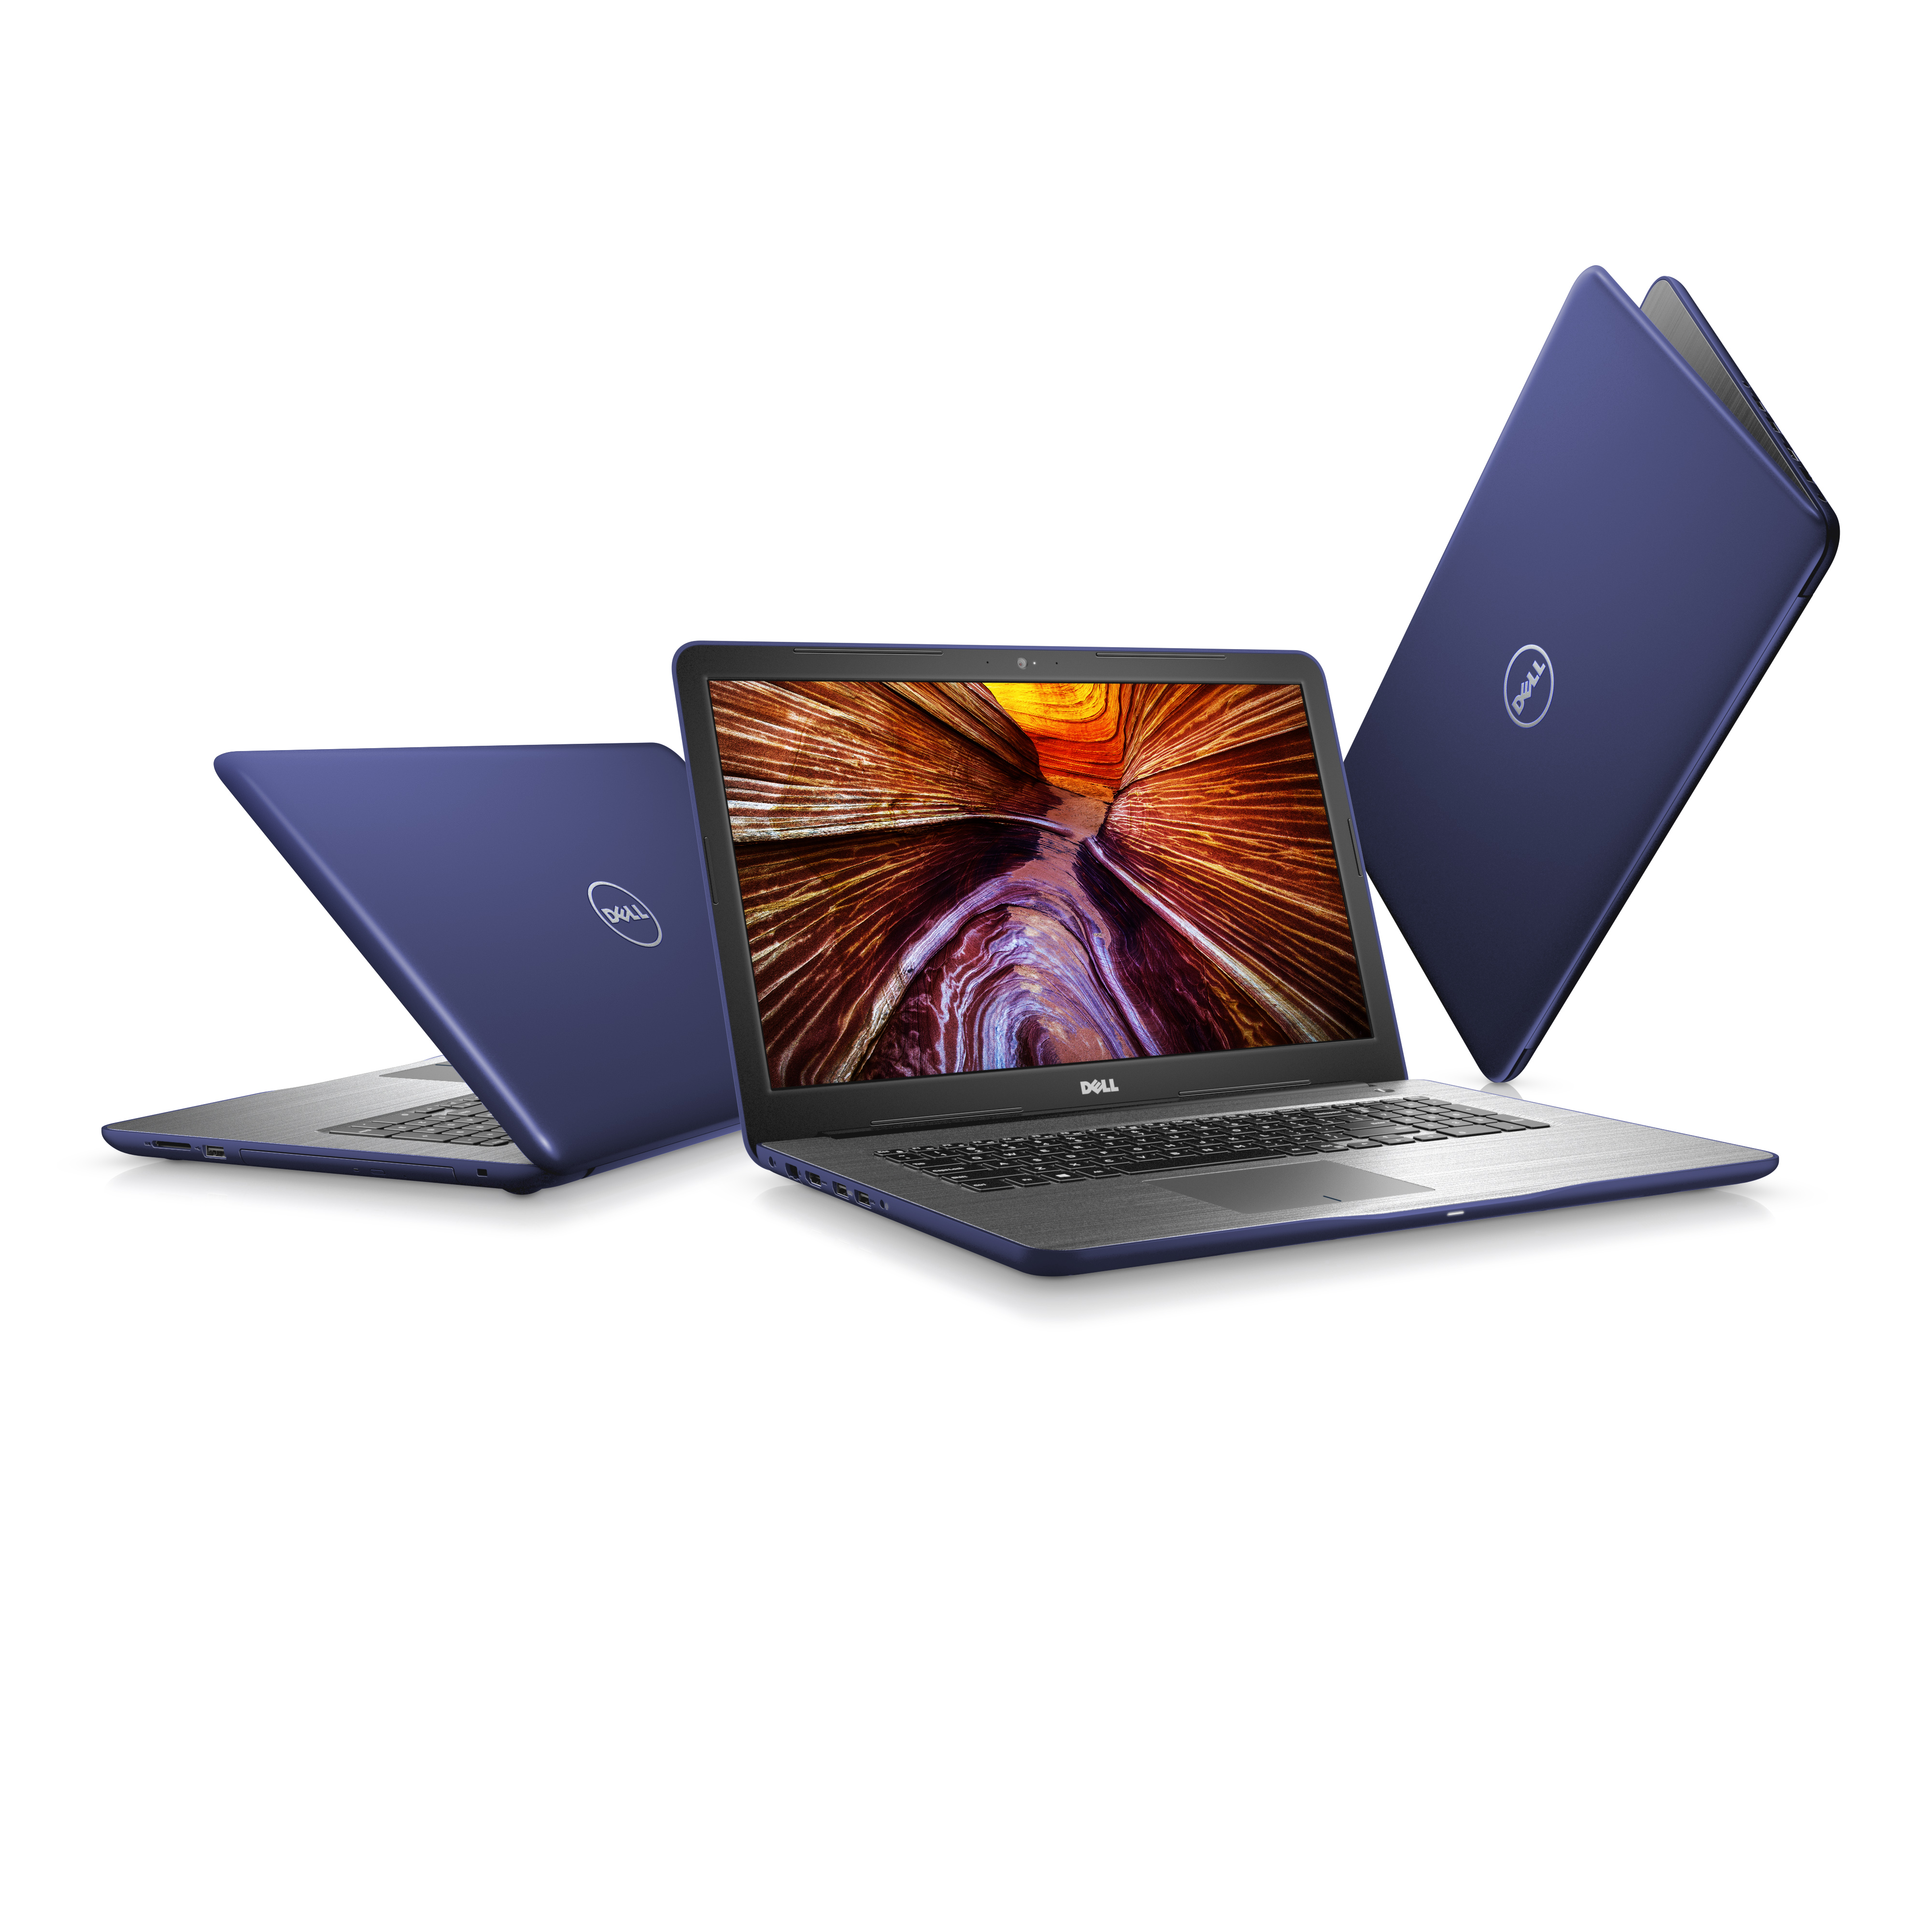 Three Dell Inspiron 17 5000 Series (Model 5767) Non-Touch 17-inch notebook computer with Intel processor, codename Gamora, shown in various orientations.